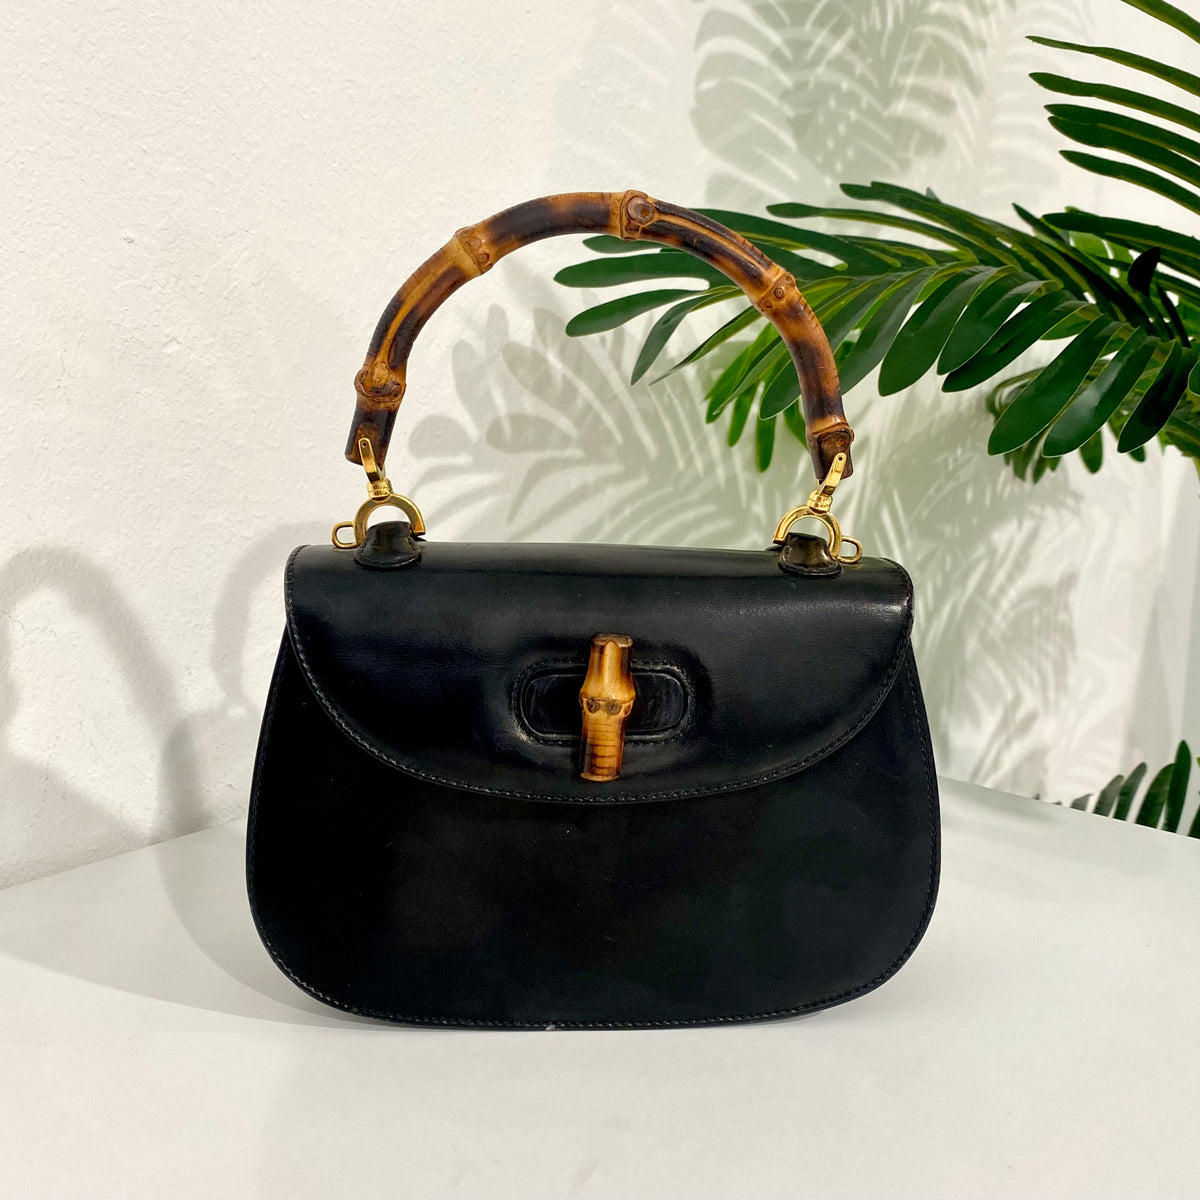 Gucci Black Leather Bamboo Handle Bag - 1950's - GHW